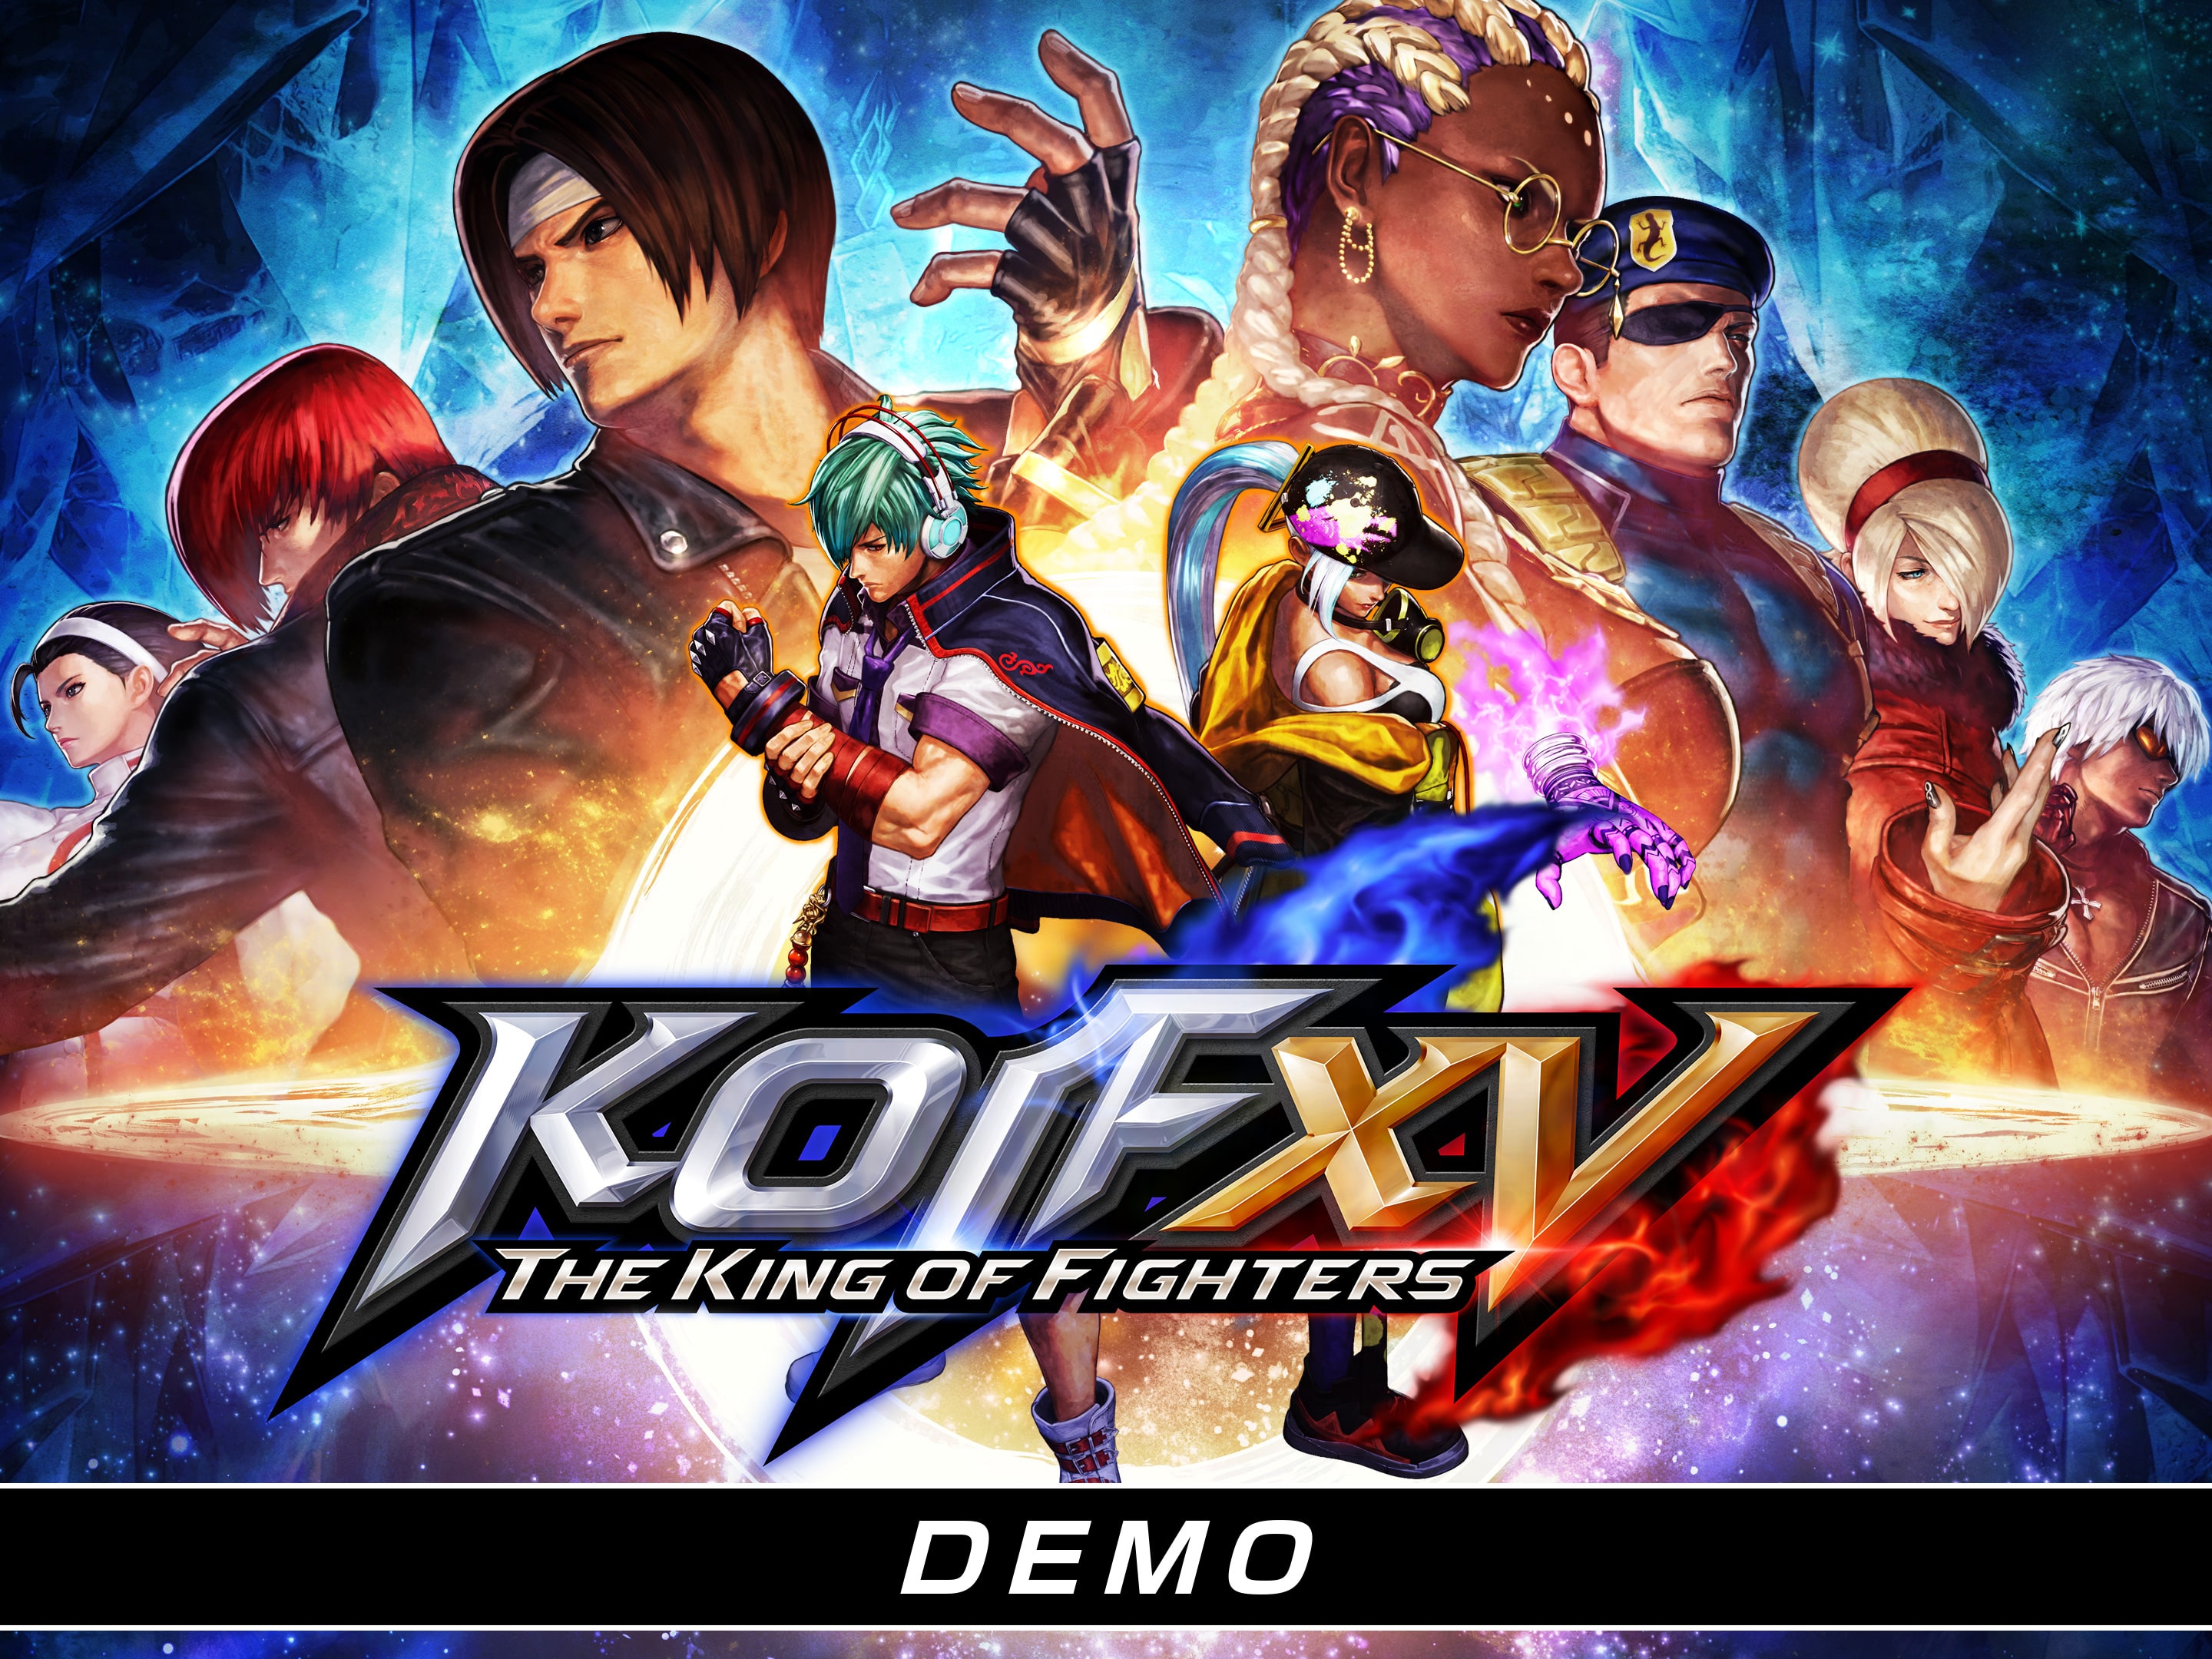 The King of Fighters XV gets PS4/PS5 demo featuring 15 available characters